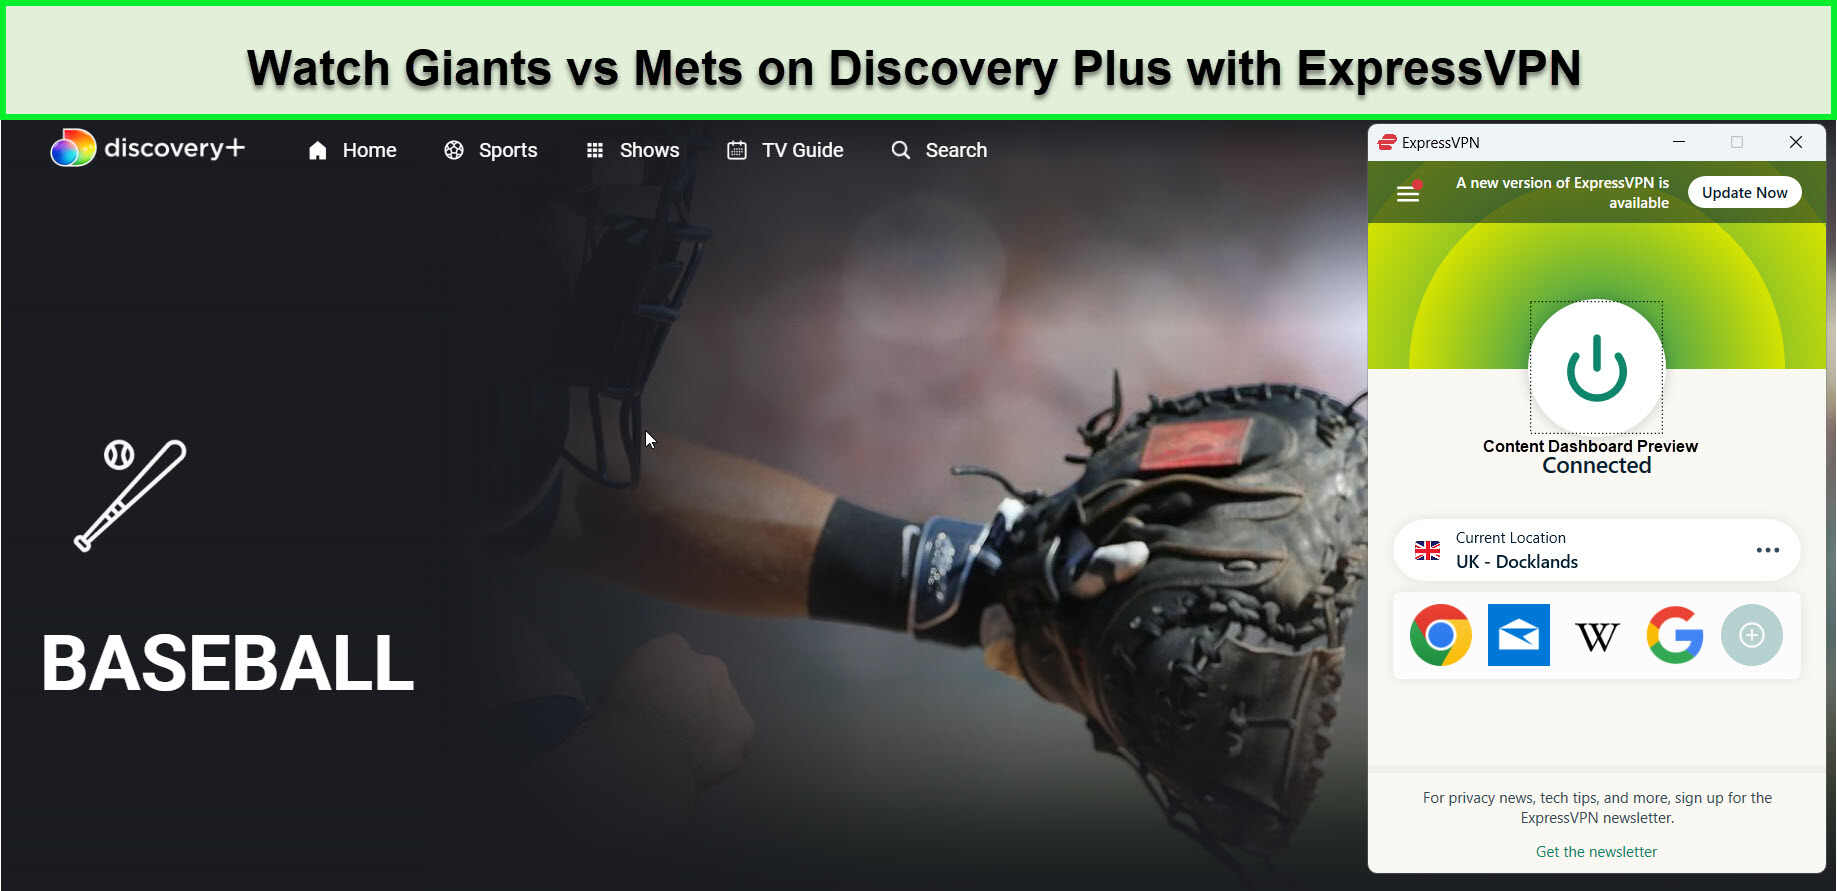 Watch-Giants-vs-Mets-in-India-on-Discovery-Plus-with-ExpressVPN